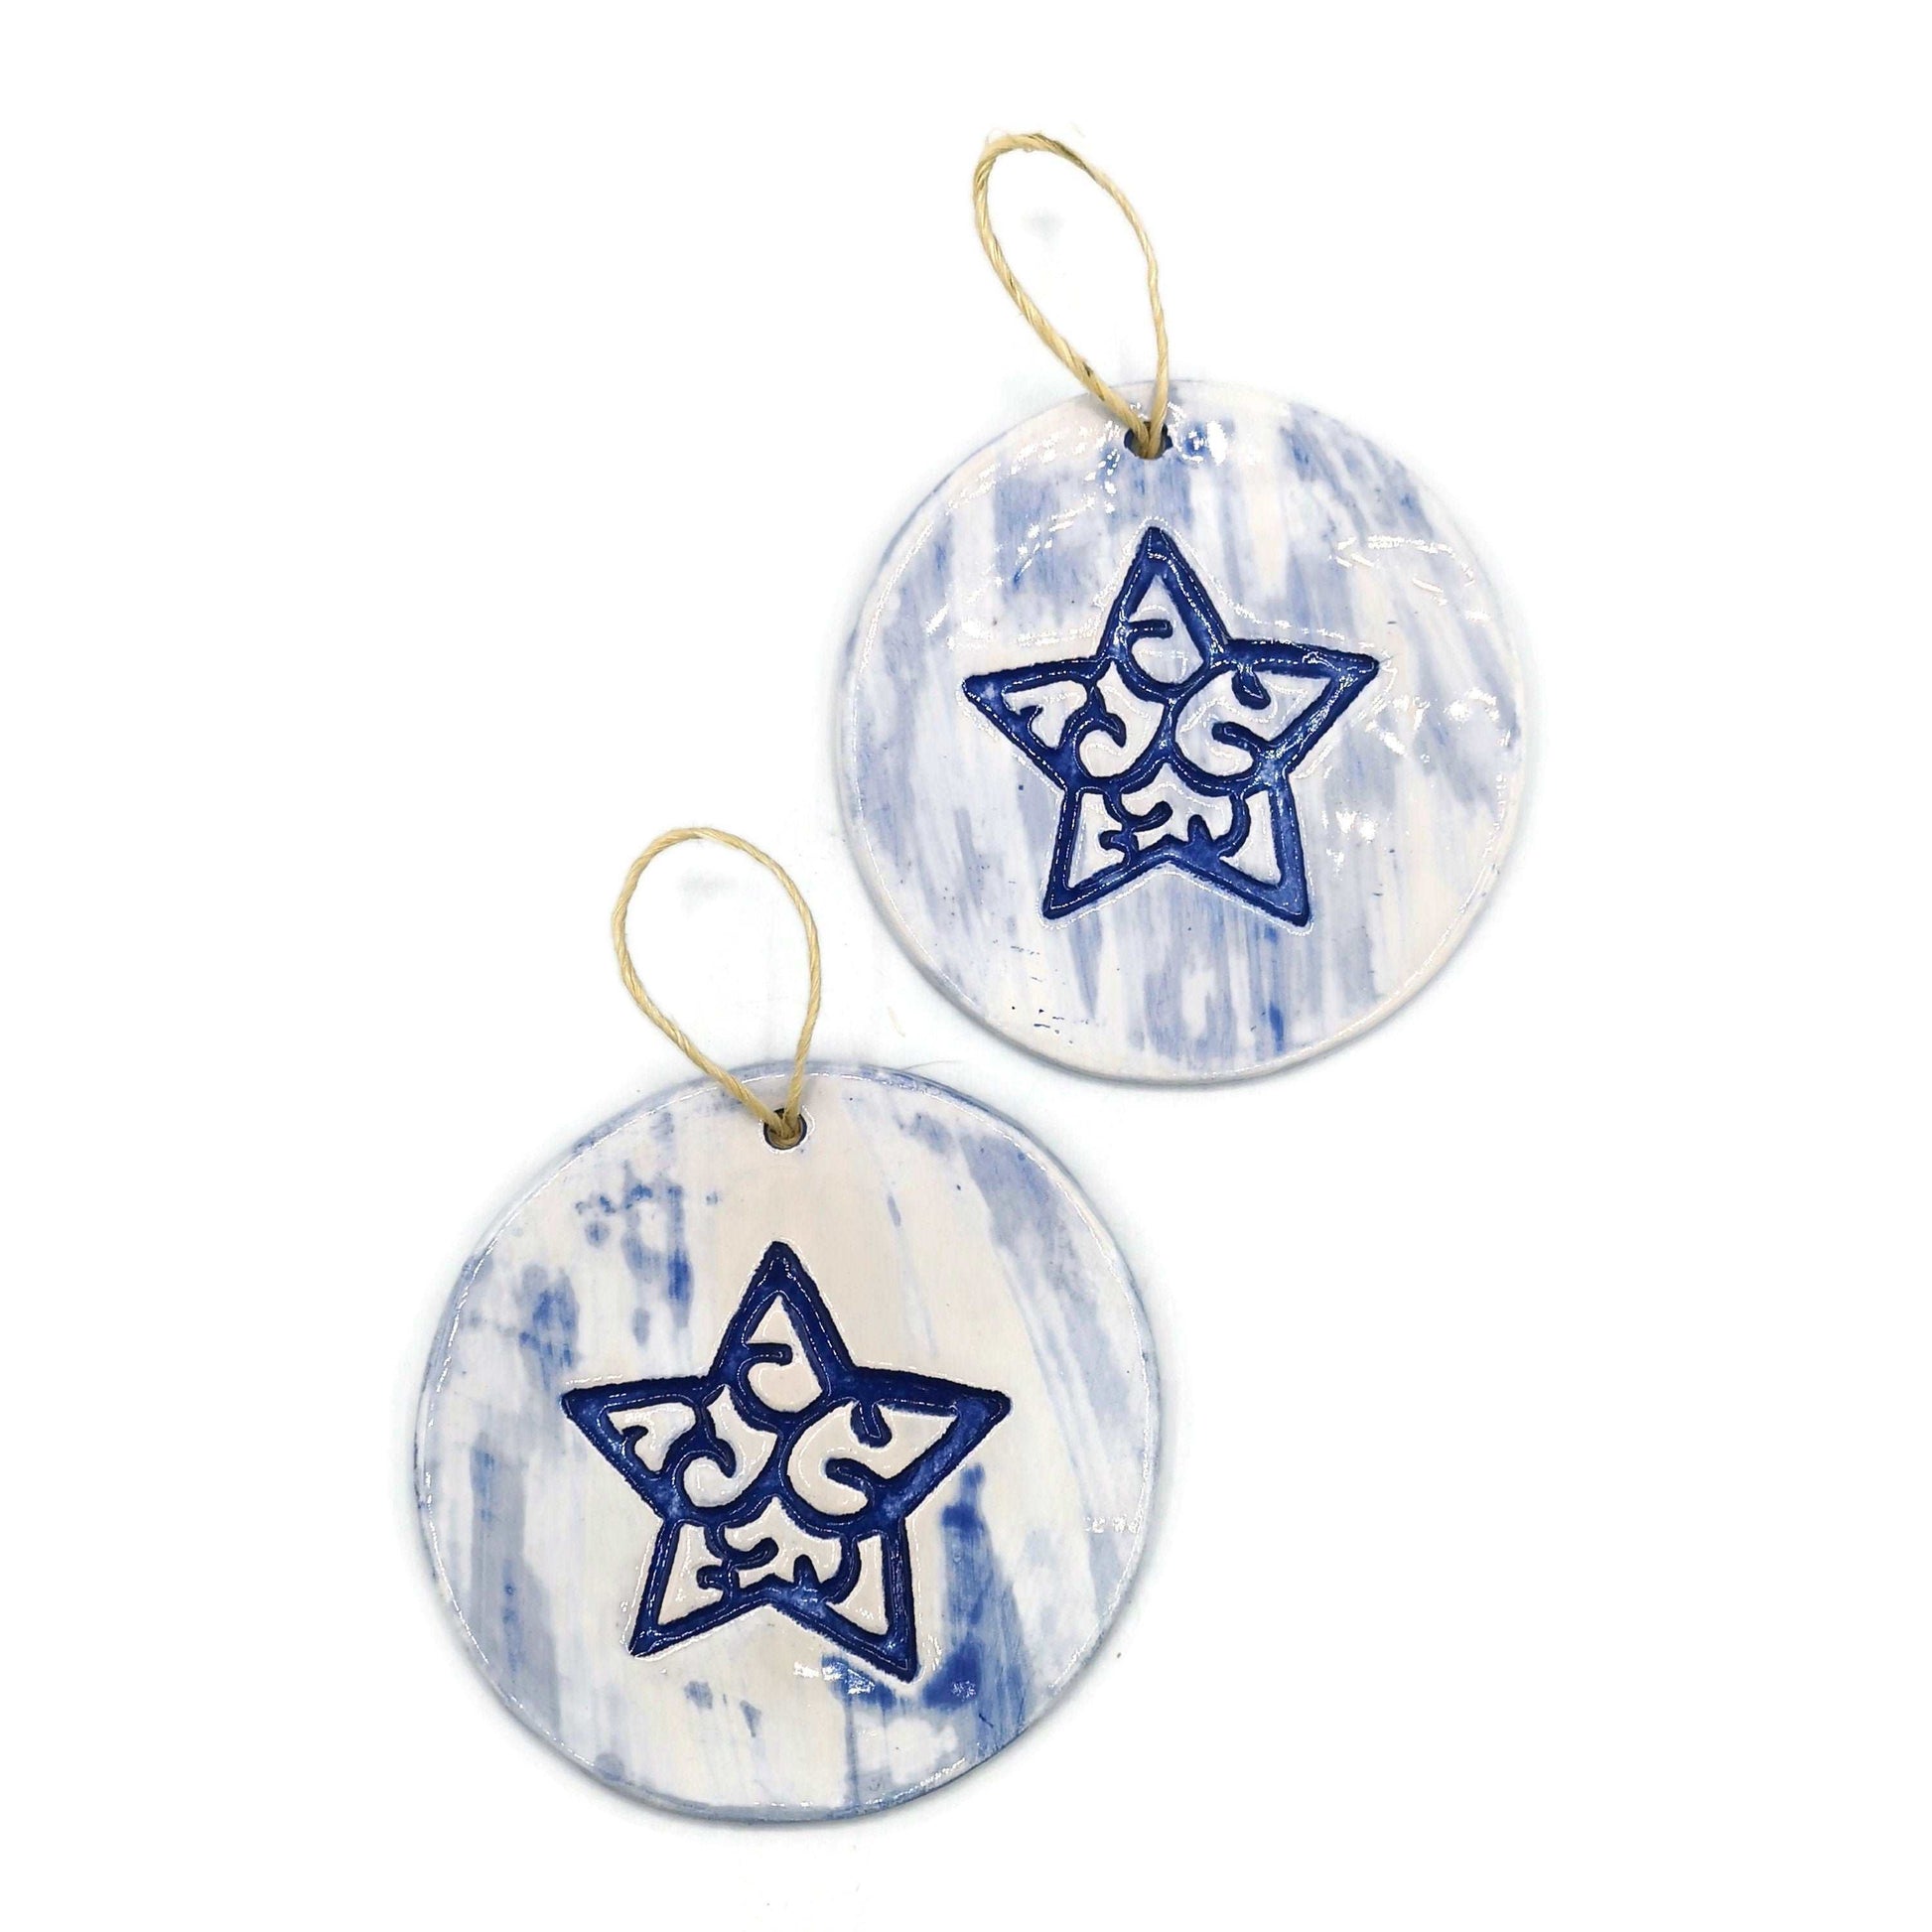 1Pc Blue Star Ornament, Ceramic Wall Hanging, Celestial Wall Decor, Christmas Decoration Trending Now, Best Sellers Handmade Wall Art